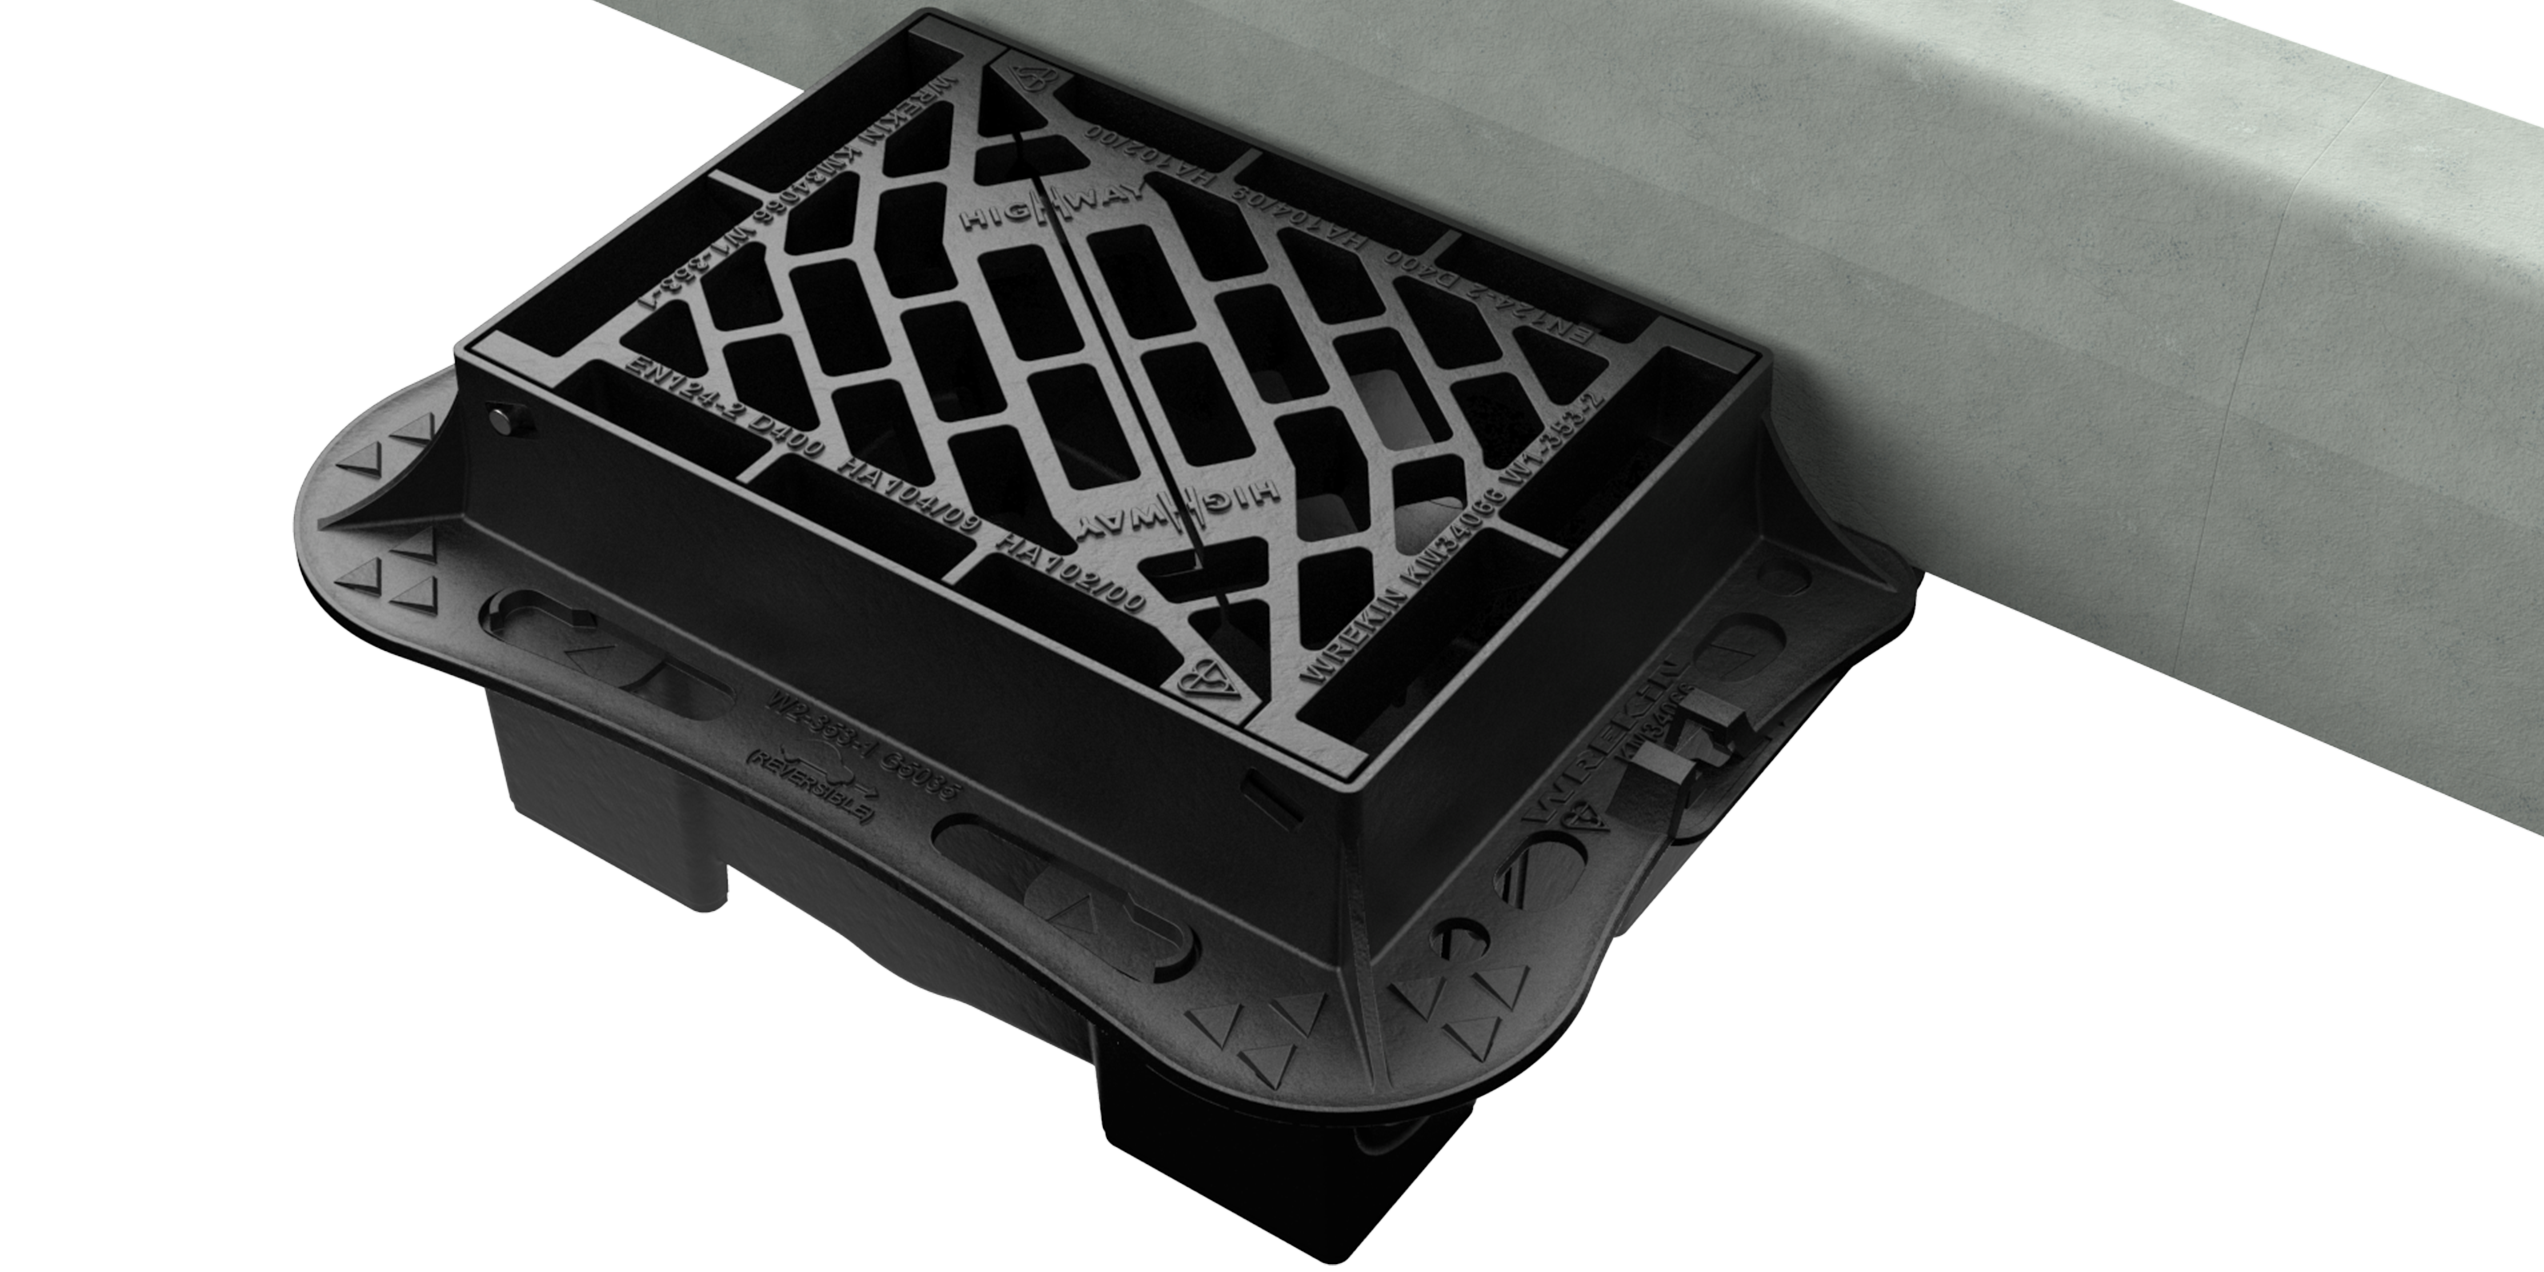 The Gully Chute Connector replaces a traditional gully pot, allowing the Gully Grating to be placed in its usual position.